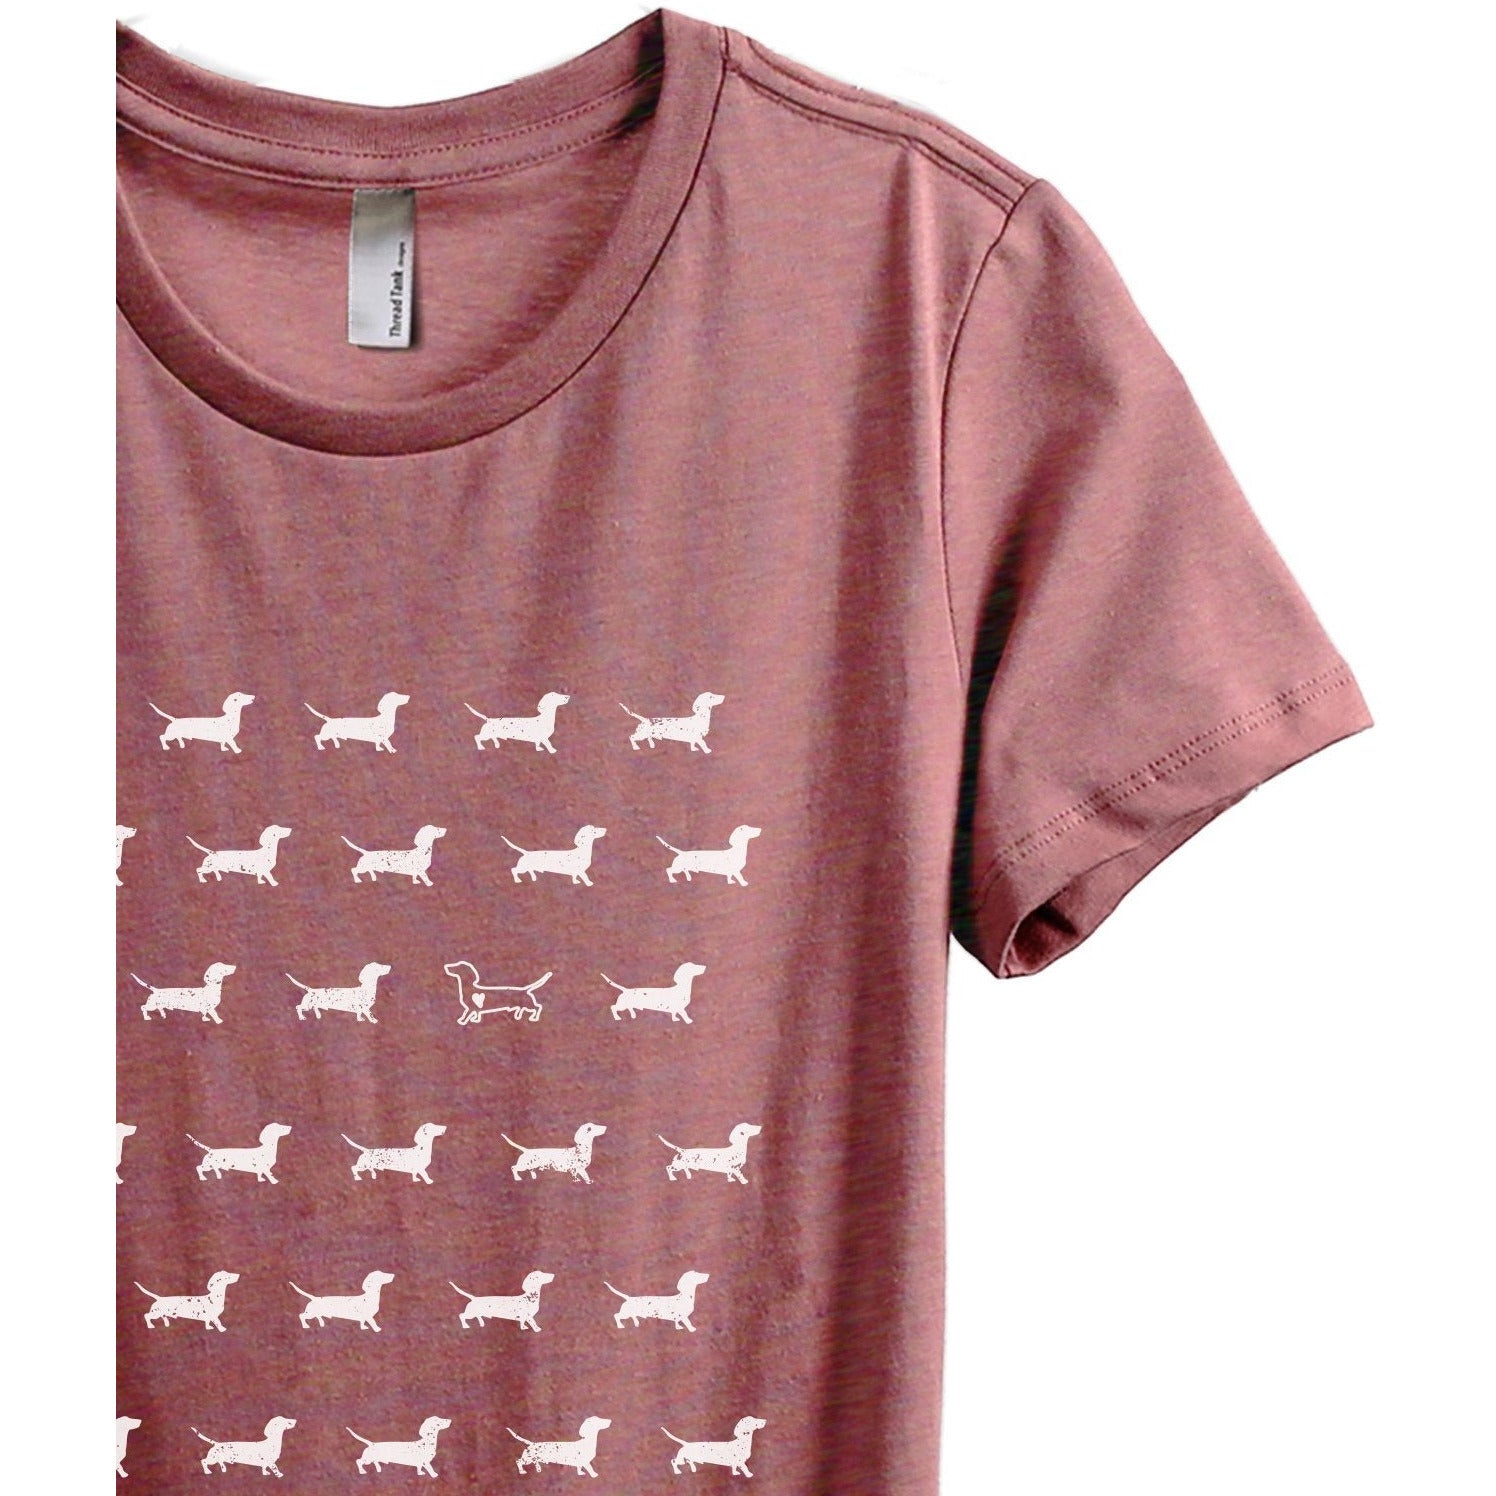 Dachshund Stand Out Women's Relaxed Crewneck T-Shirt Top Tee Heather Rouge